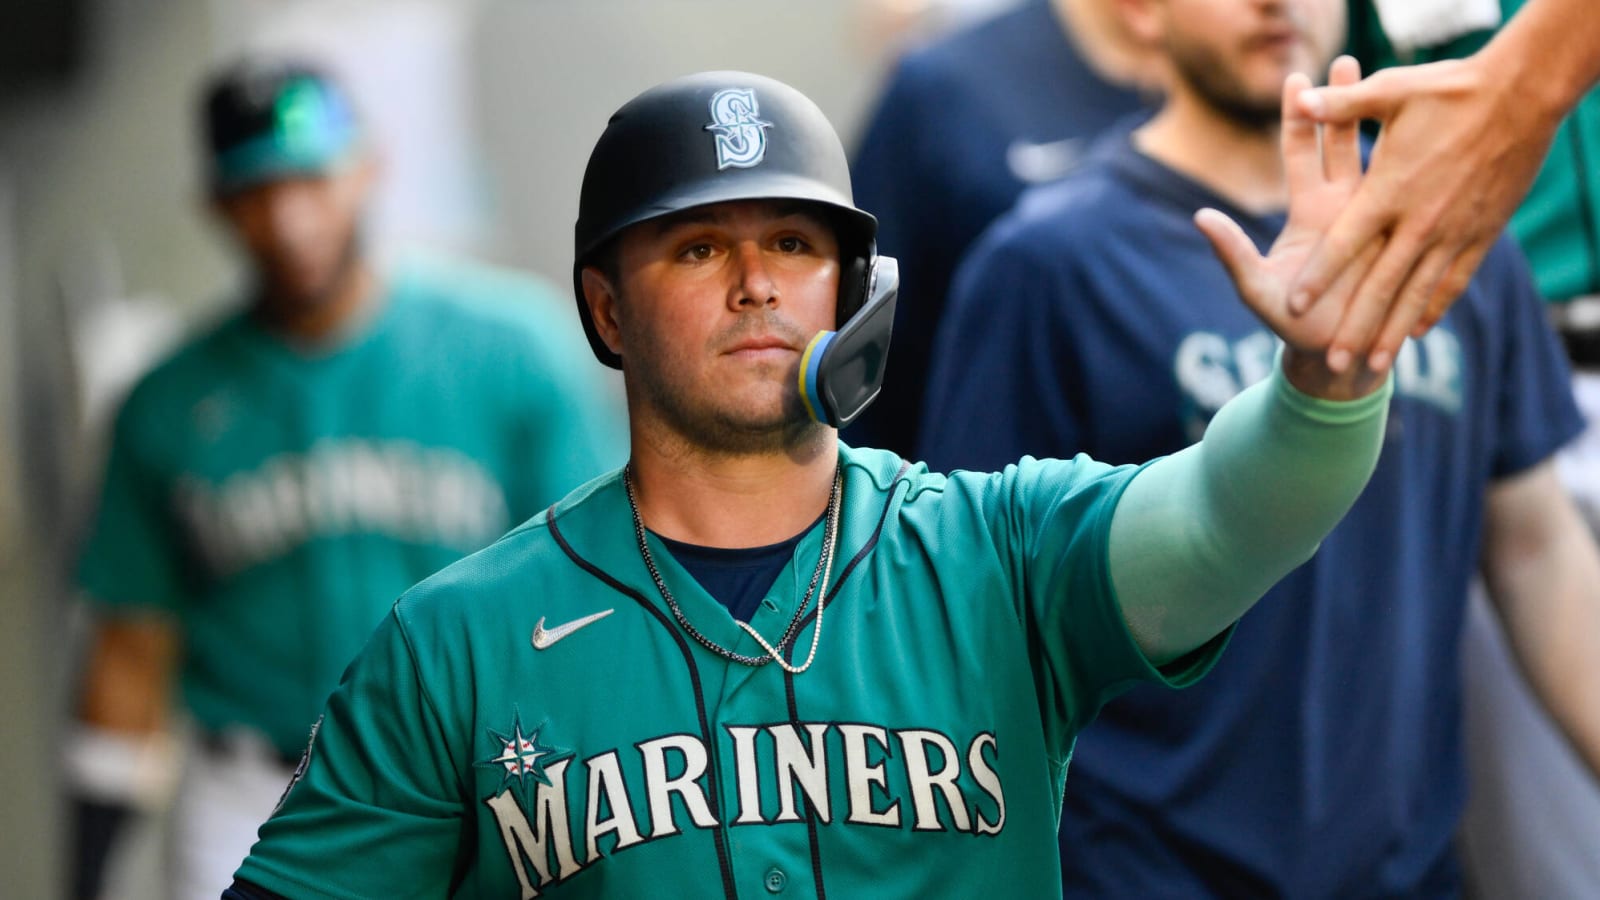 Report: Mariners listening to trade offers for two All-Star players